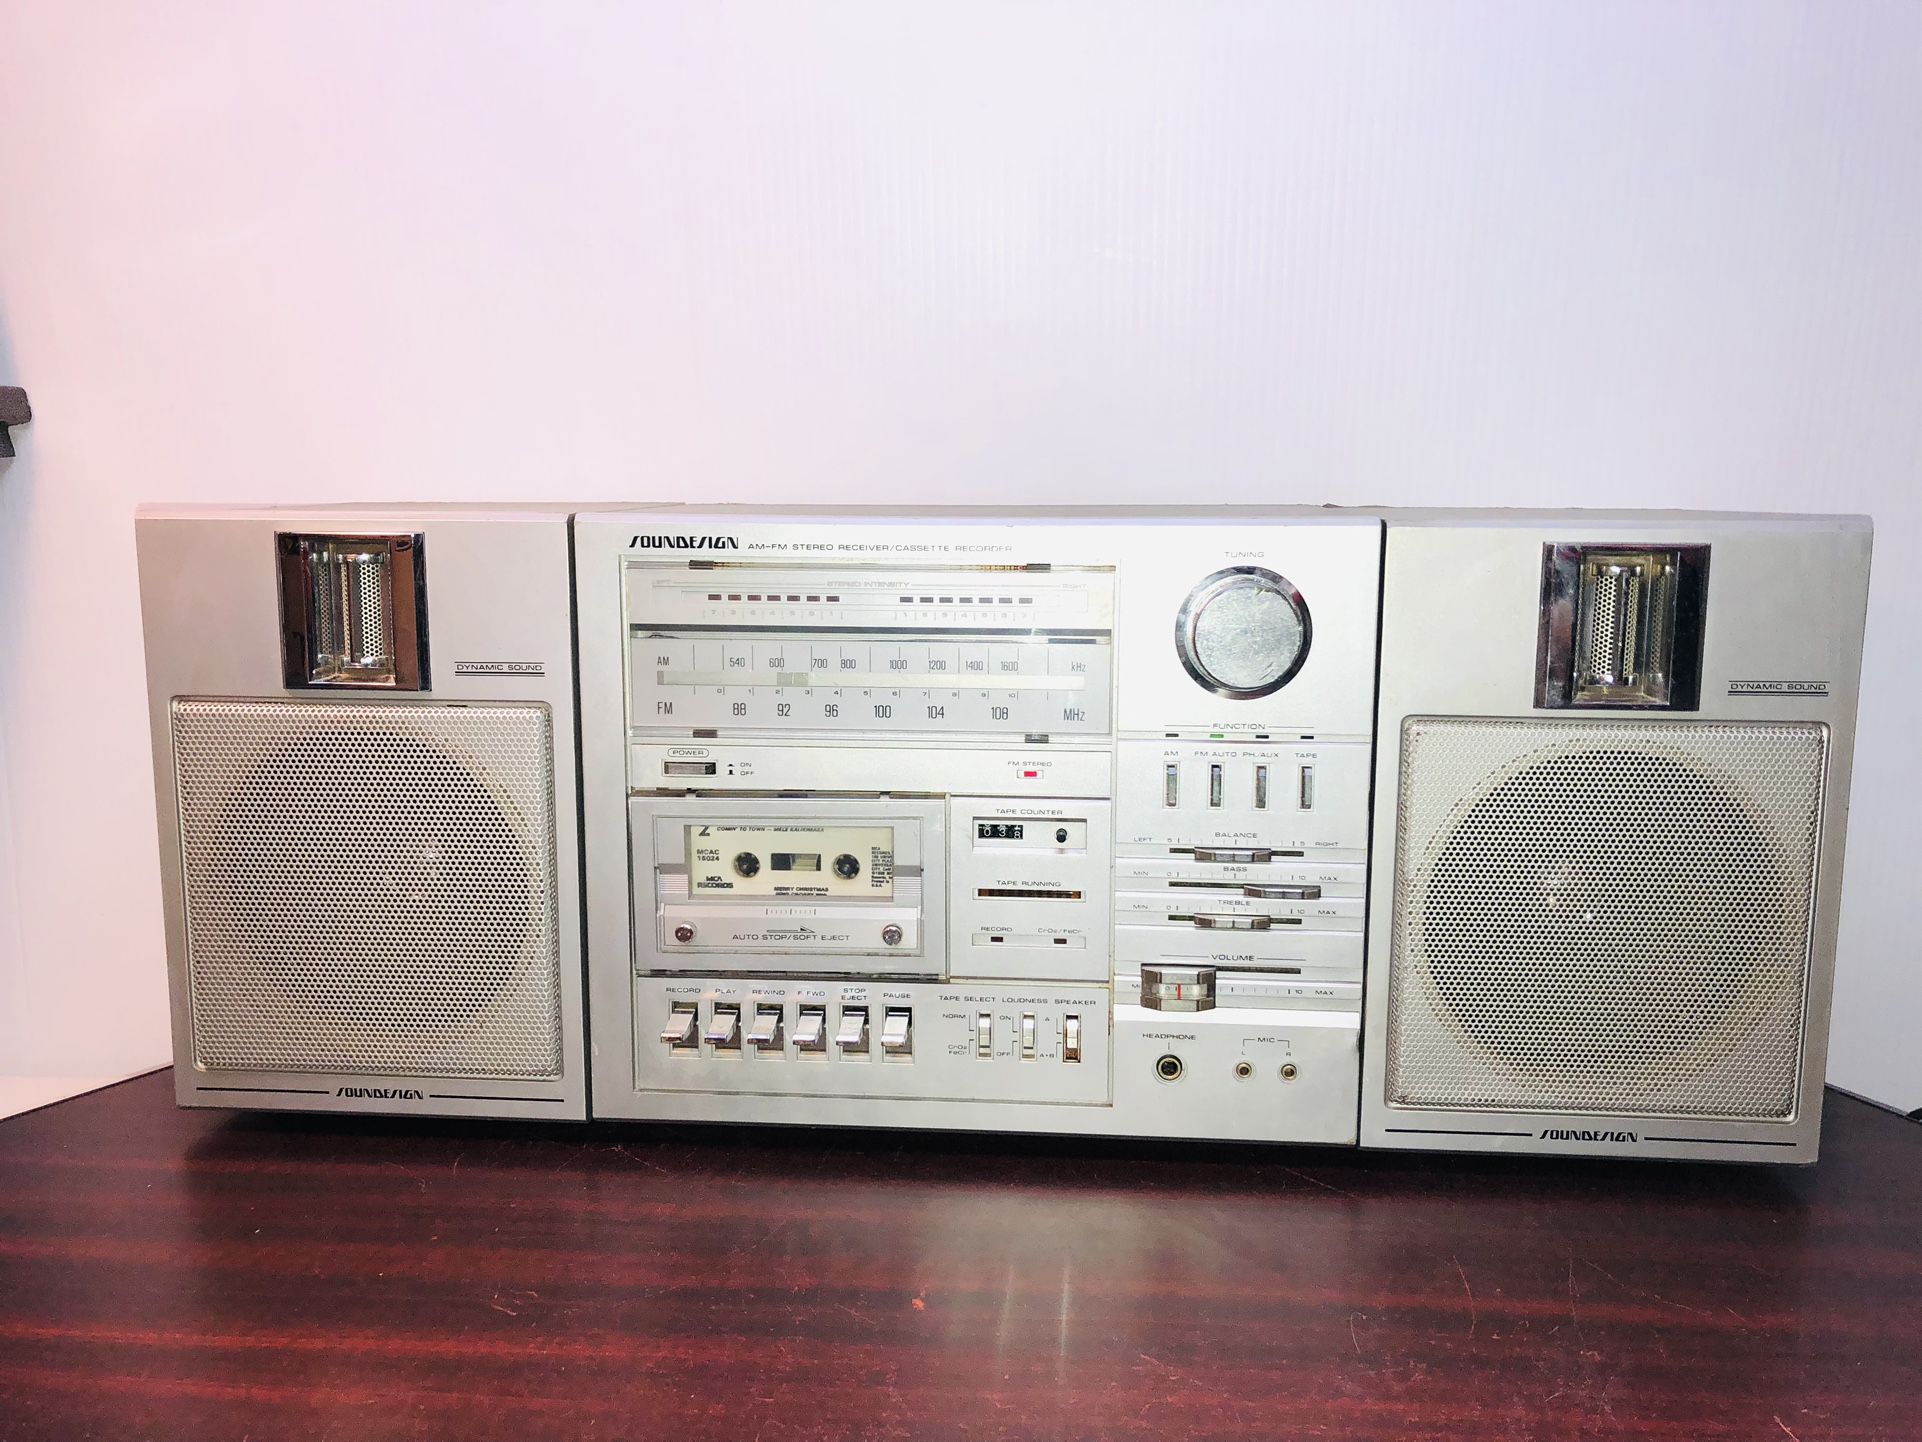 Soundesign 5648 AM/FM Stereo Receiver Cassette Tape Recorder TESTED & WORKING